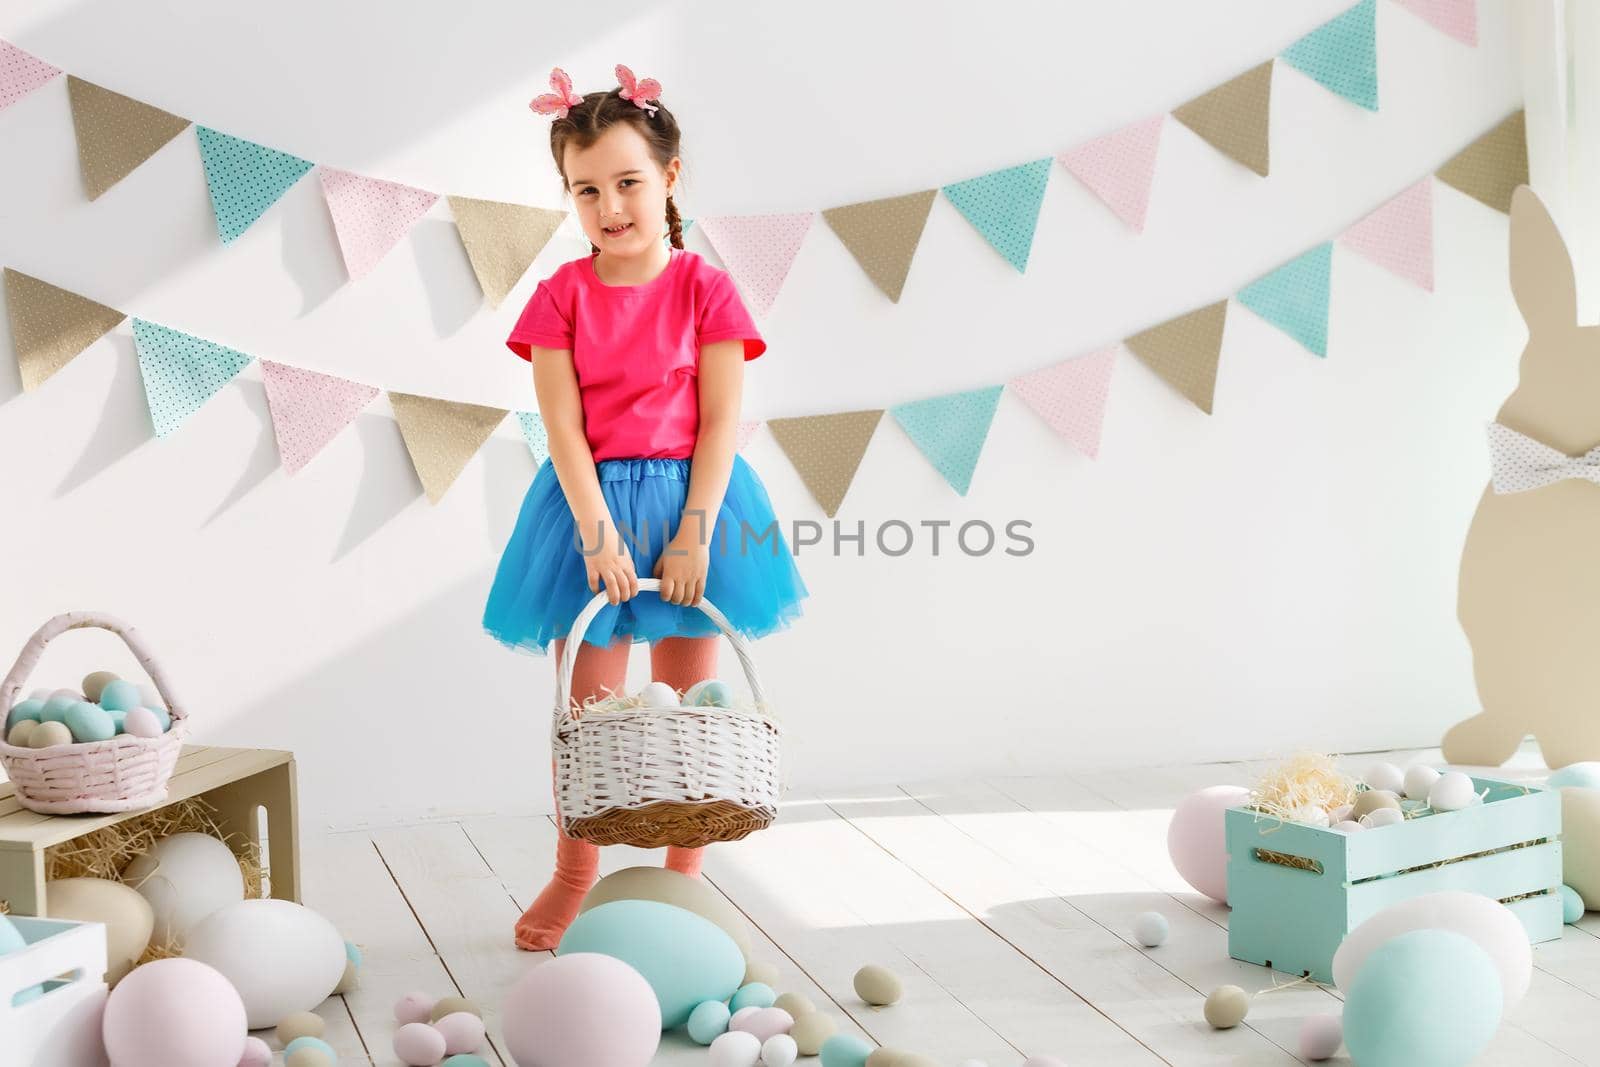 Getting ready to Easter. Lovely little girl holding an Easter egg and smiling with decoration in the background by Andelov13